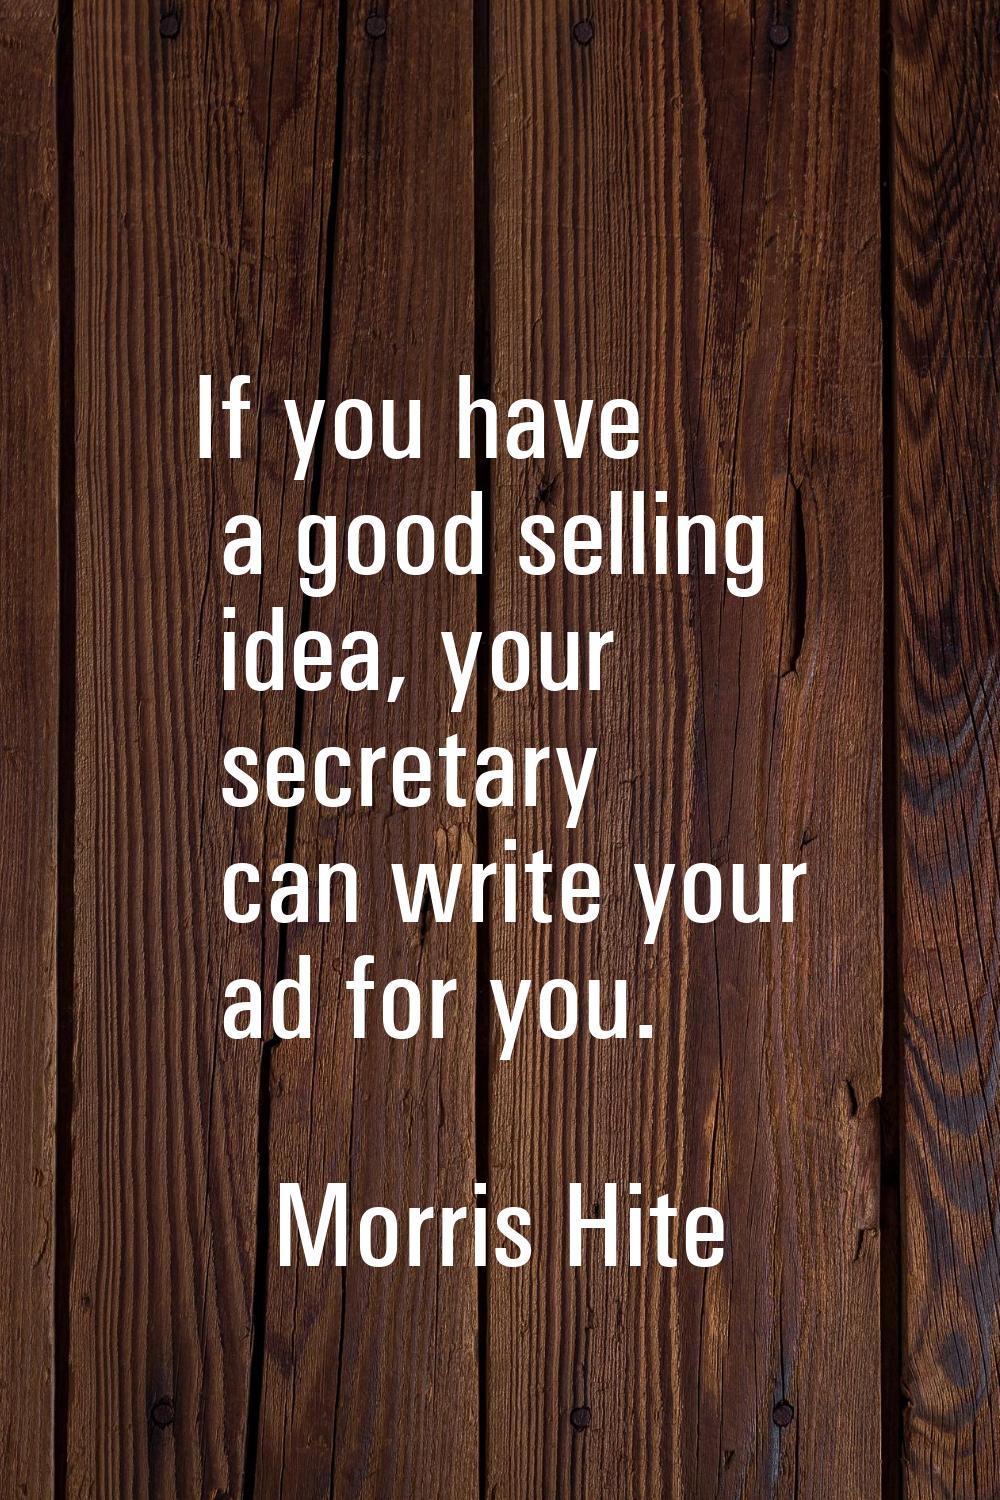 If you have a good selling idea, your secretary can write your ad for you.